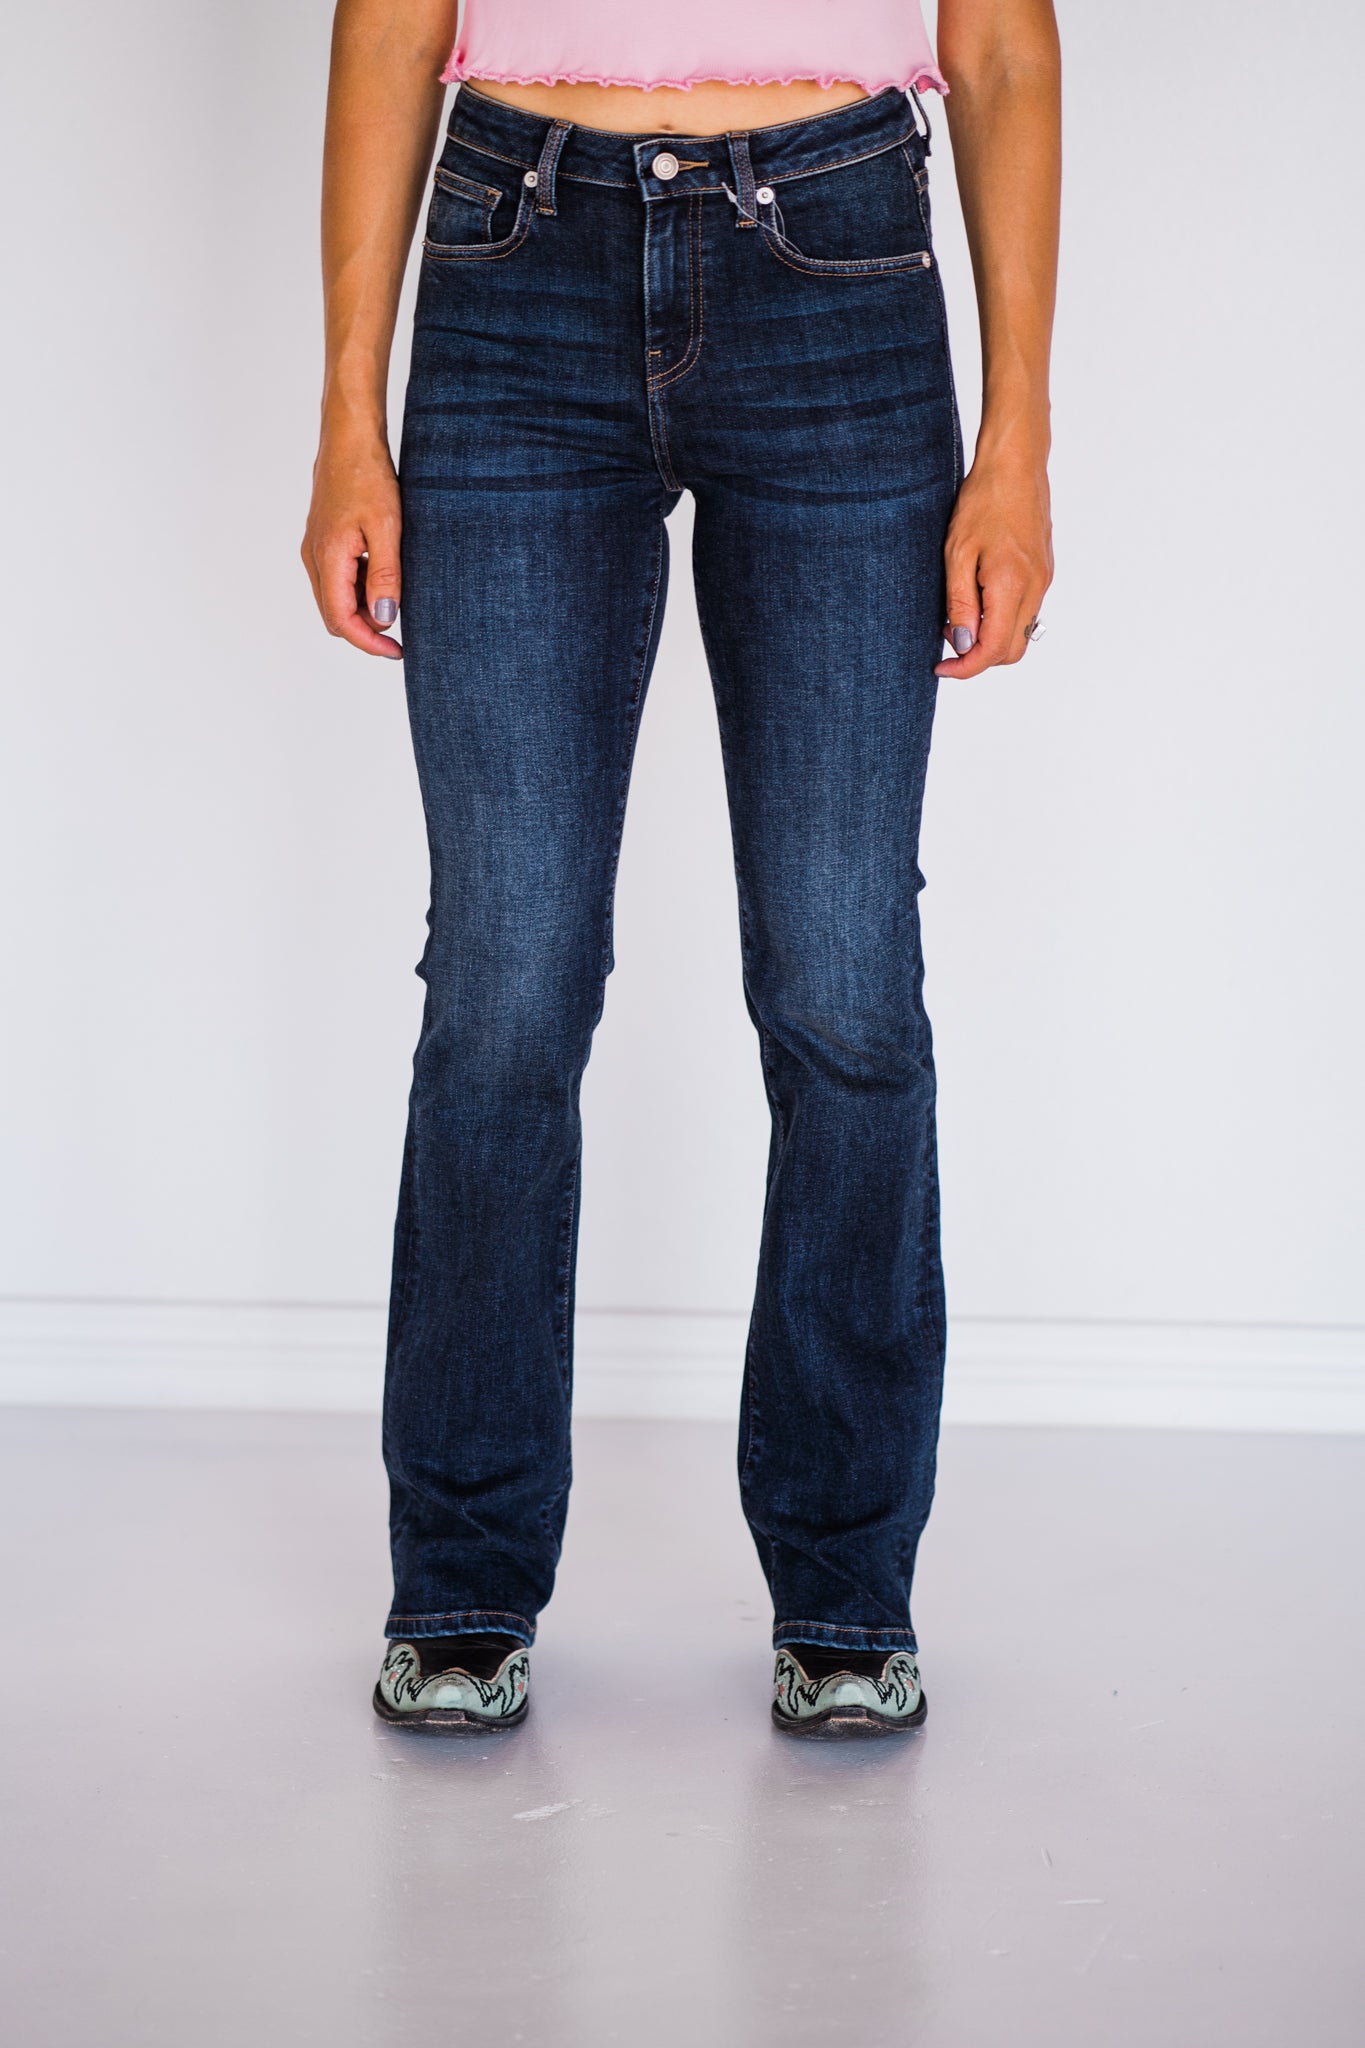 Your New Favorite Mid-Rise Non-Distressed Dark Wash Bootcut Jeans